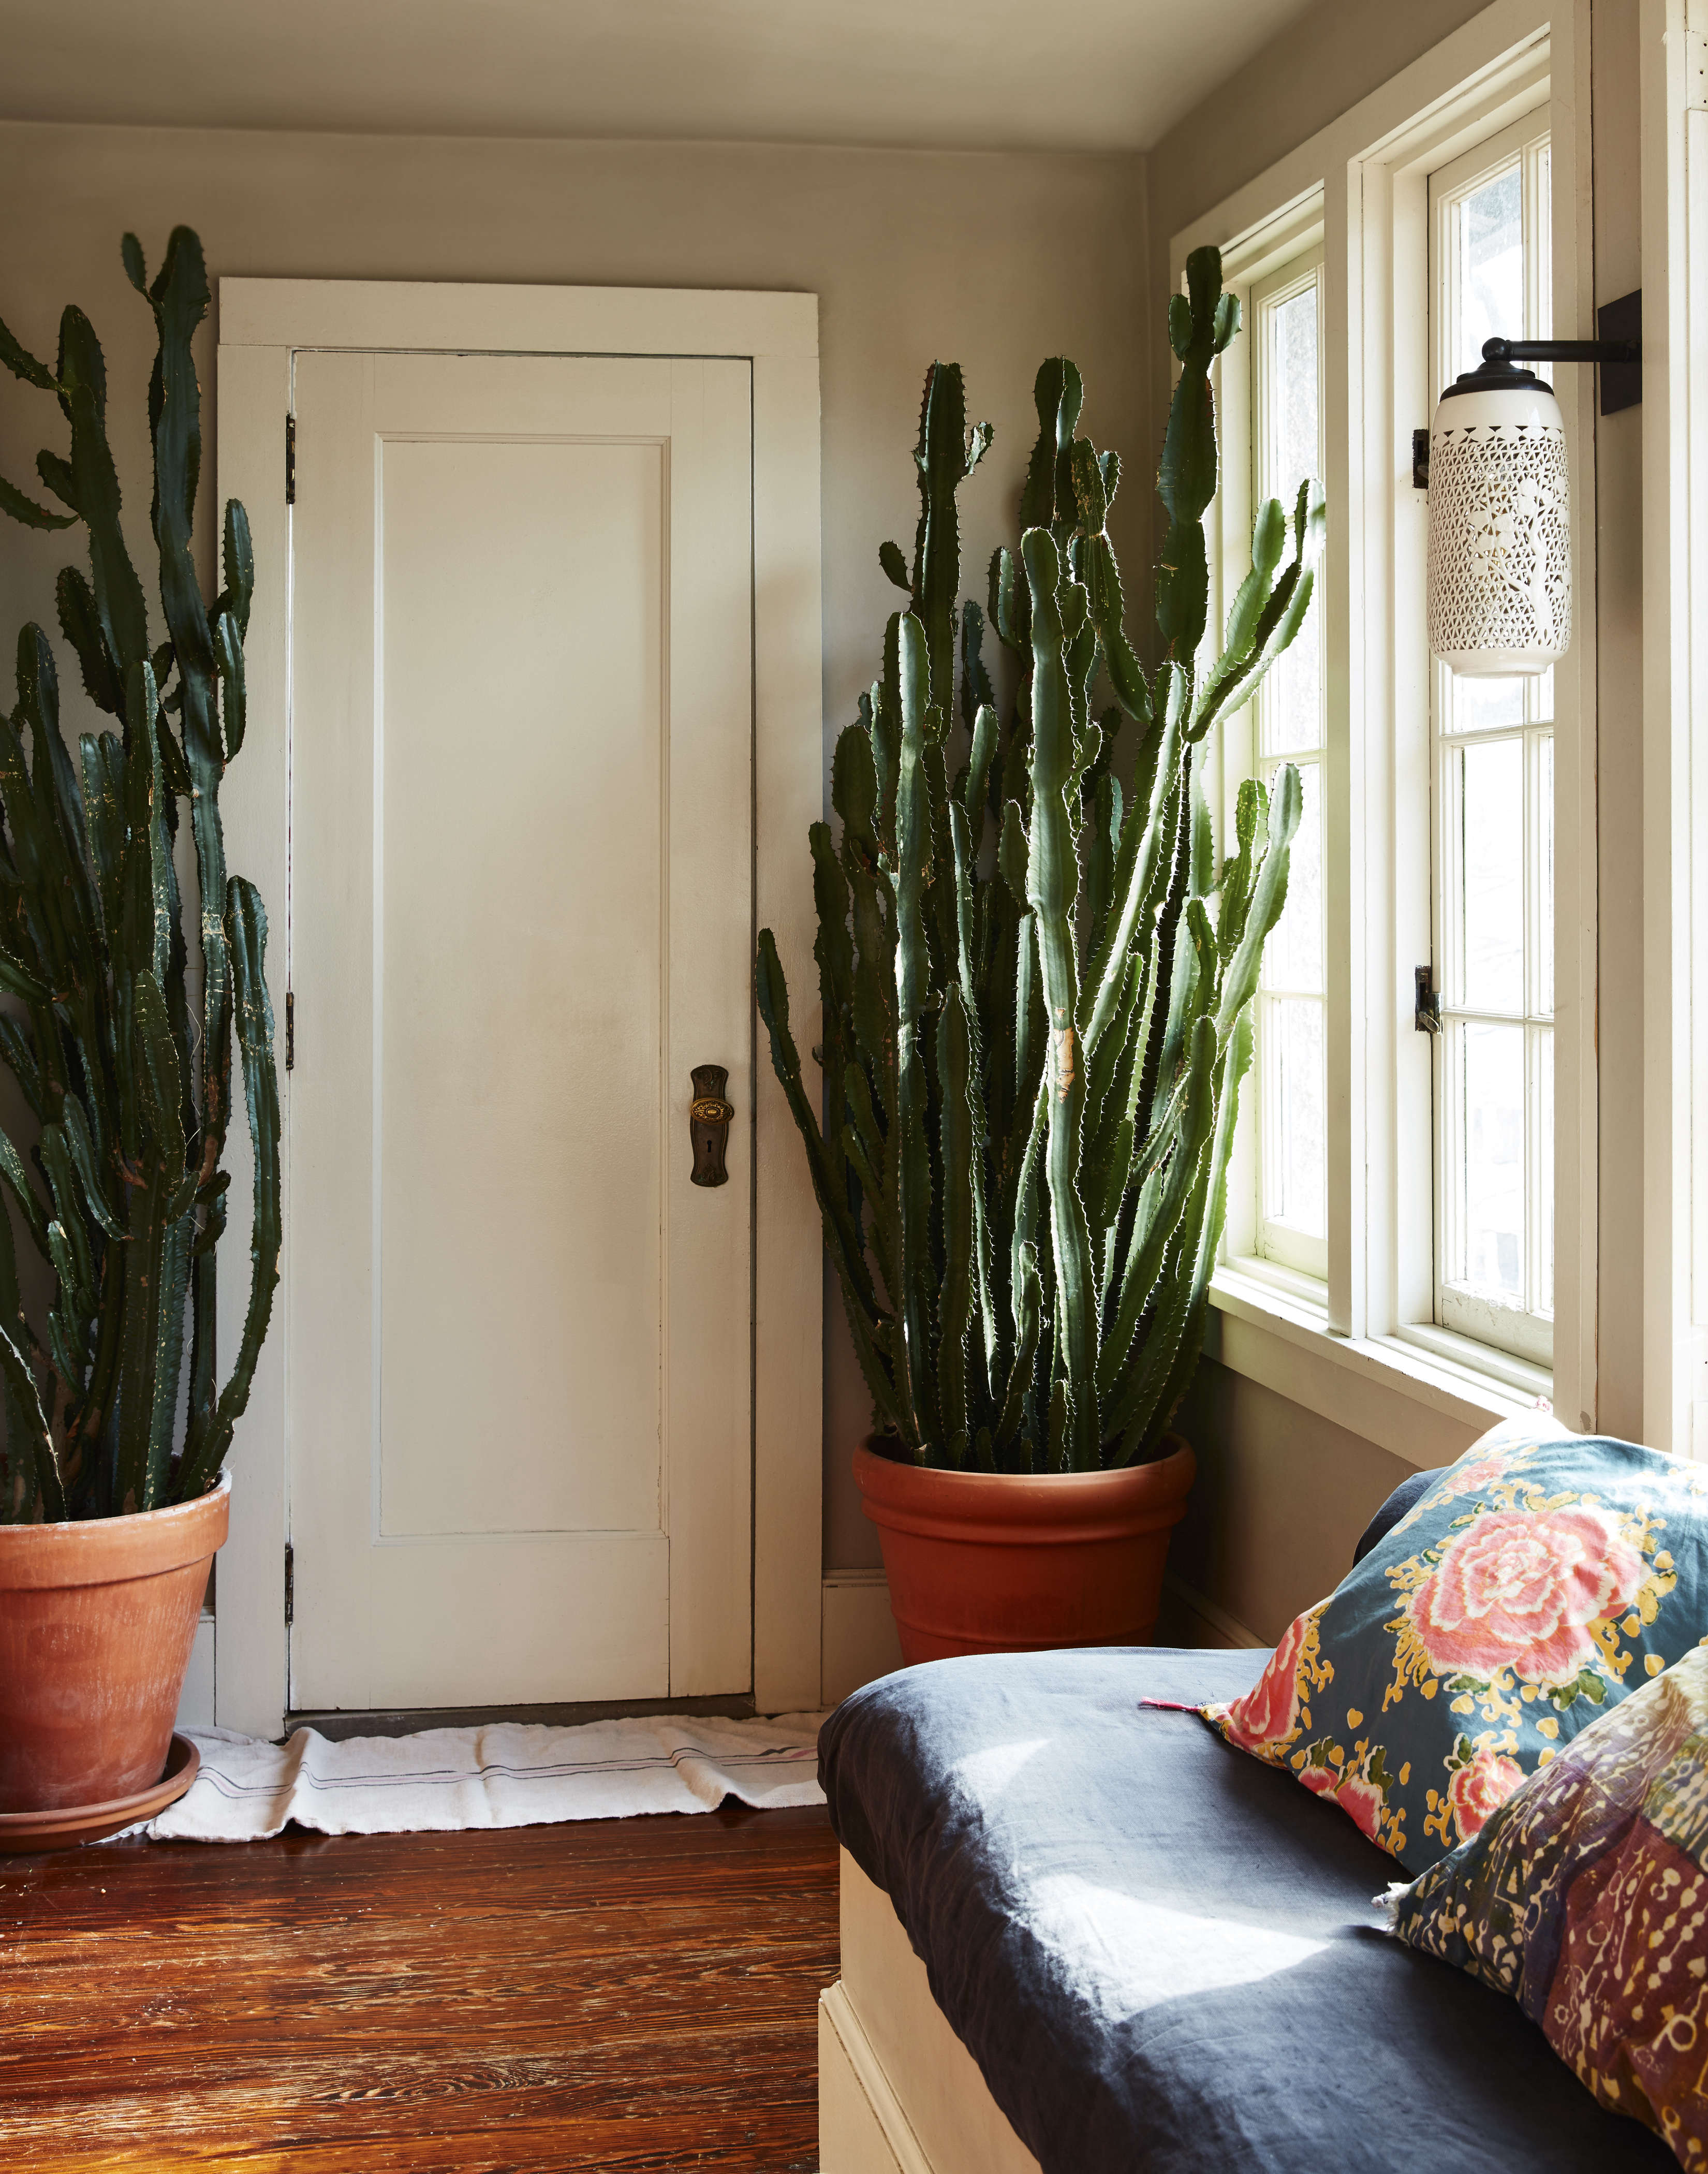 thriving euphorbia flank the bathroom door in the sunroom. the sconce, by custo 23